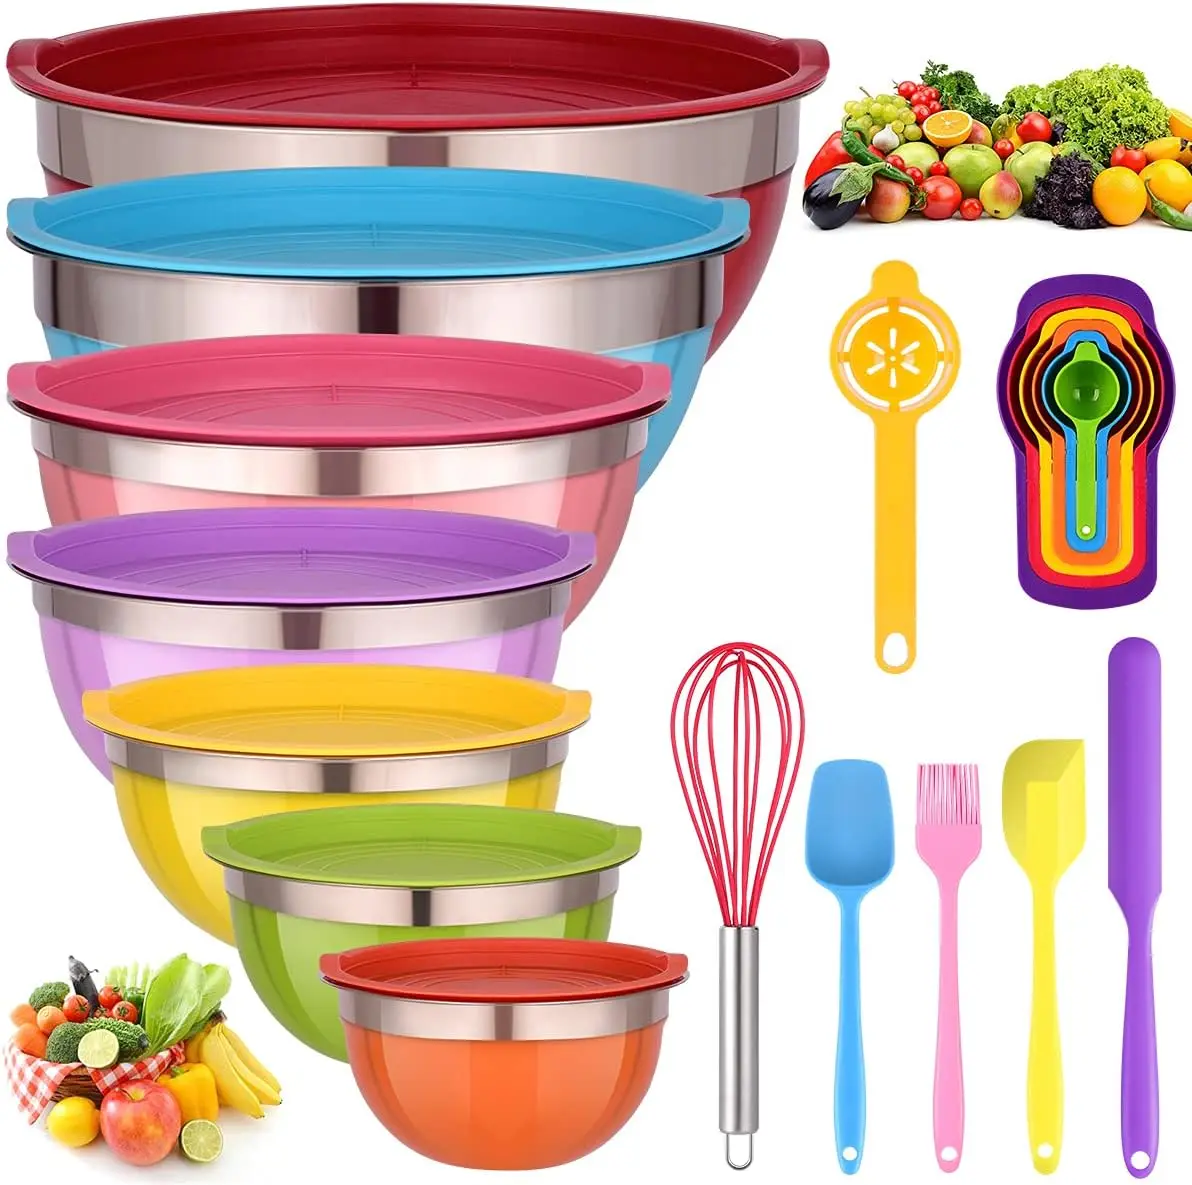 

Bowls with Lids for Kitchen - 26 PCS Stainless Steel Nesting Colorful Mixing Bowls Set for Baking,Mixing,Serving & Prepping, Cut